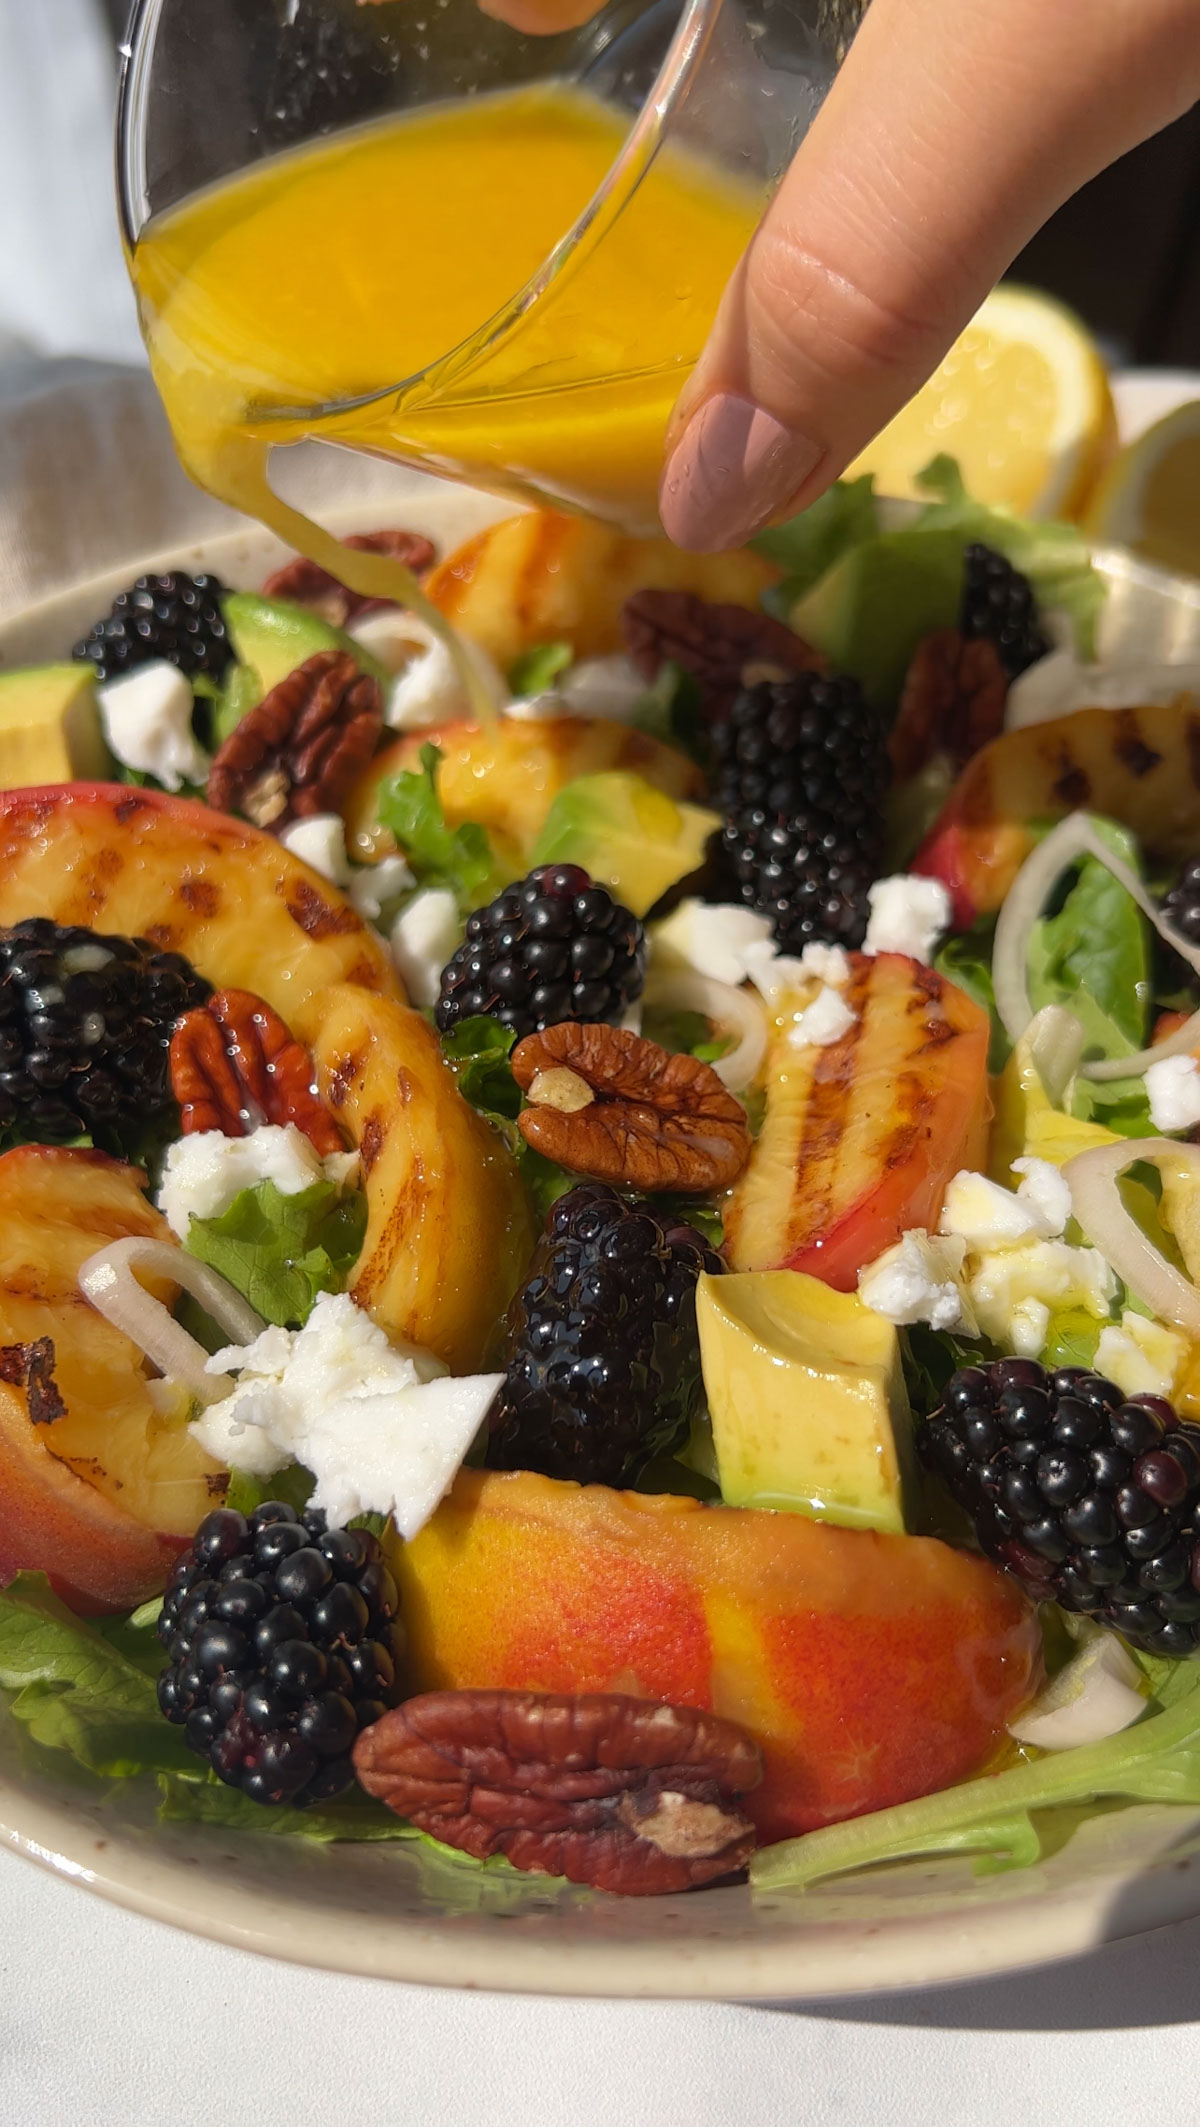 Adding the dressing to the top of a peach salad.